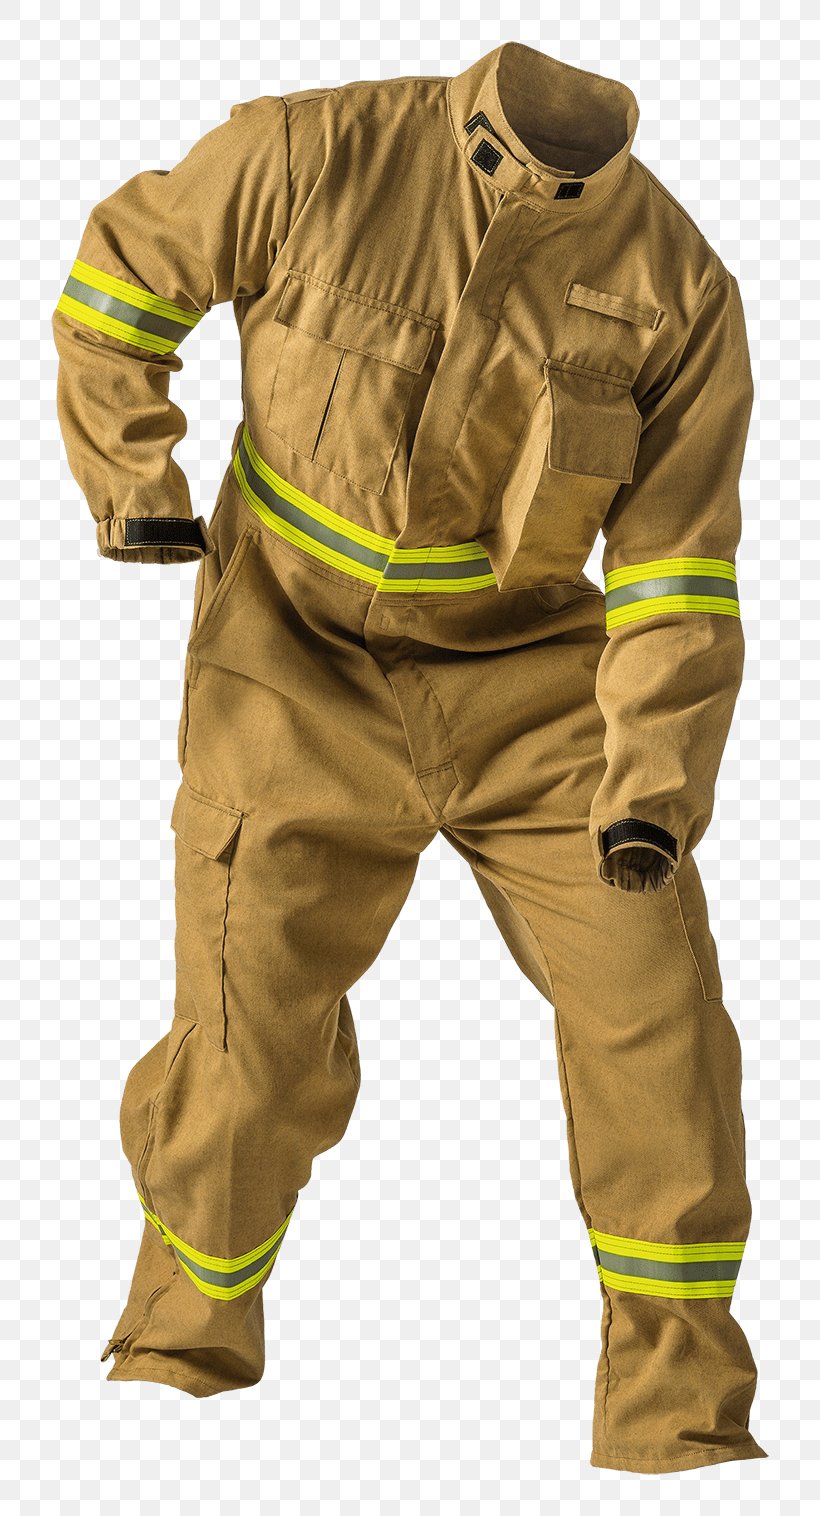 Firefighter Bunker Gear Boilersuit Hazardous Material Suits Personal Protective Equipment, PNG, 800x1516px, Firefighter, Boilersuit, Bunker Gear, Clothing, Costume Download Free